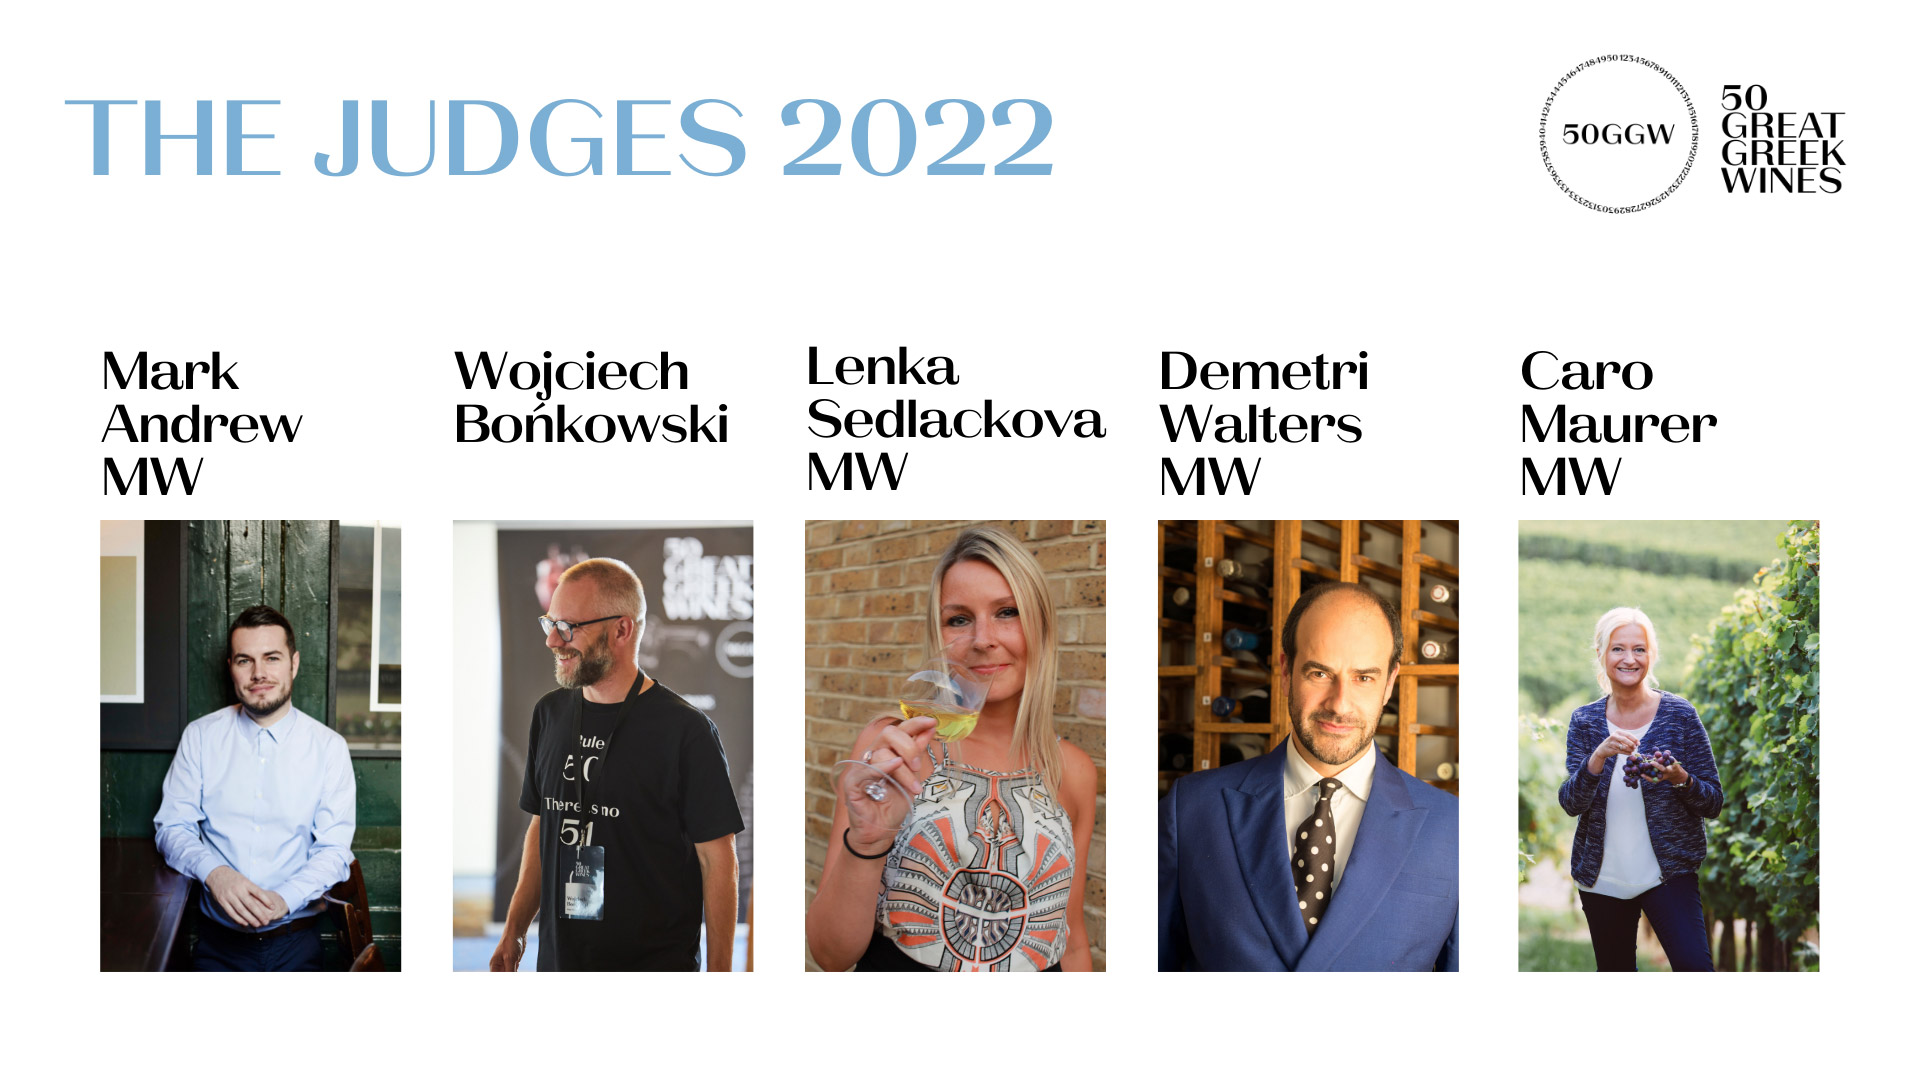 50 Great Greek Wines the judges